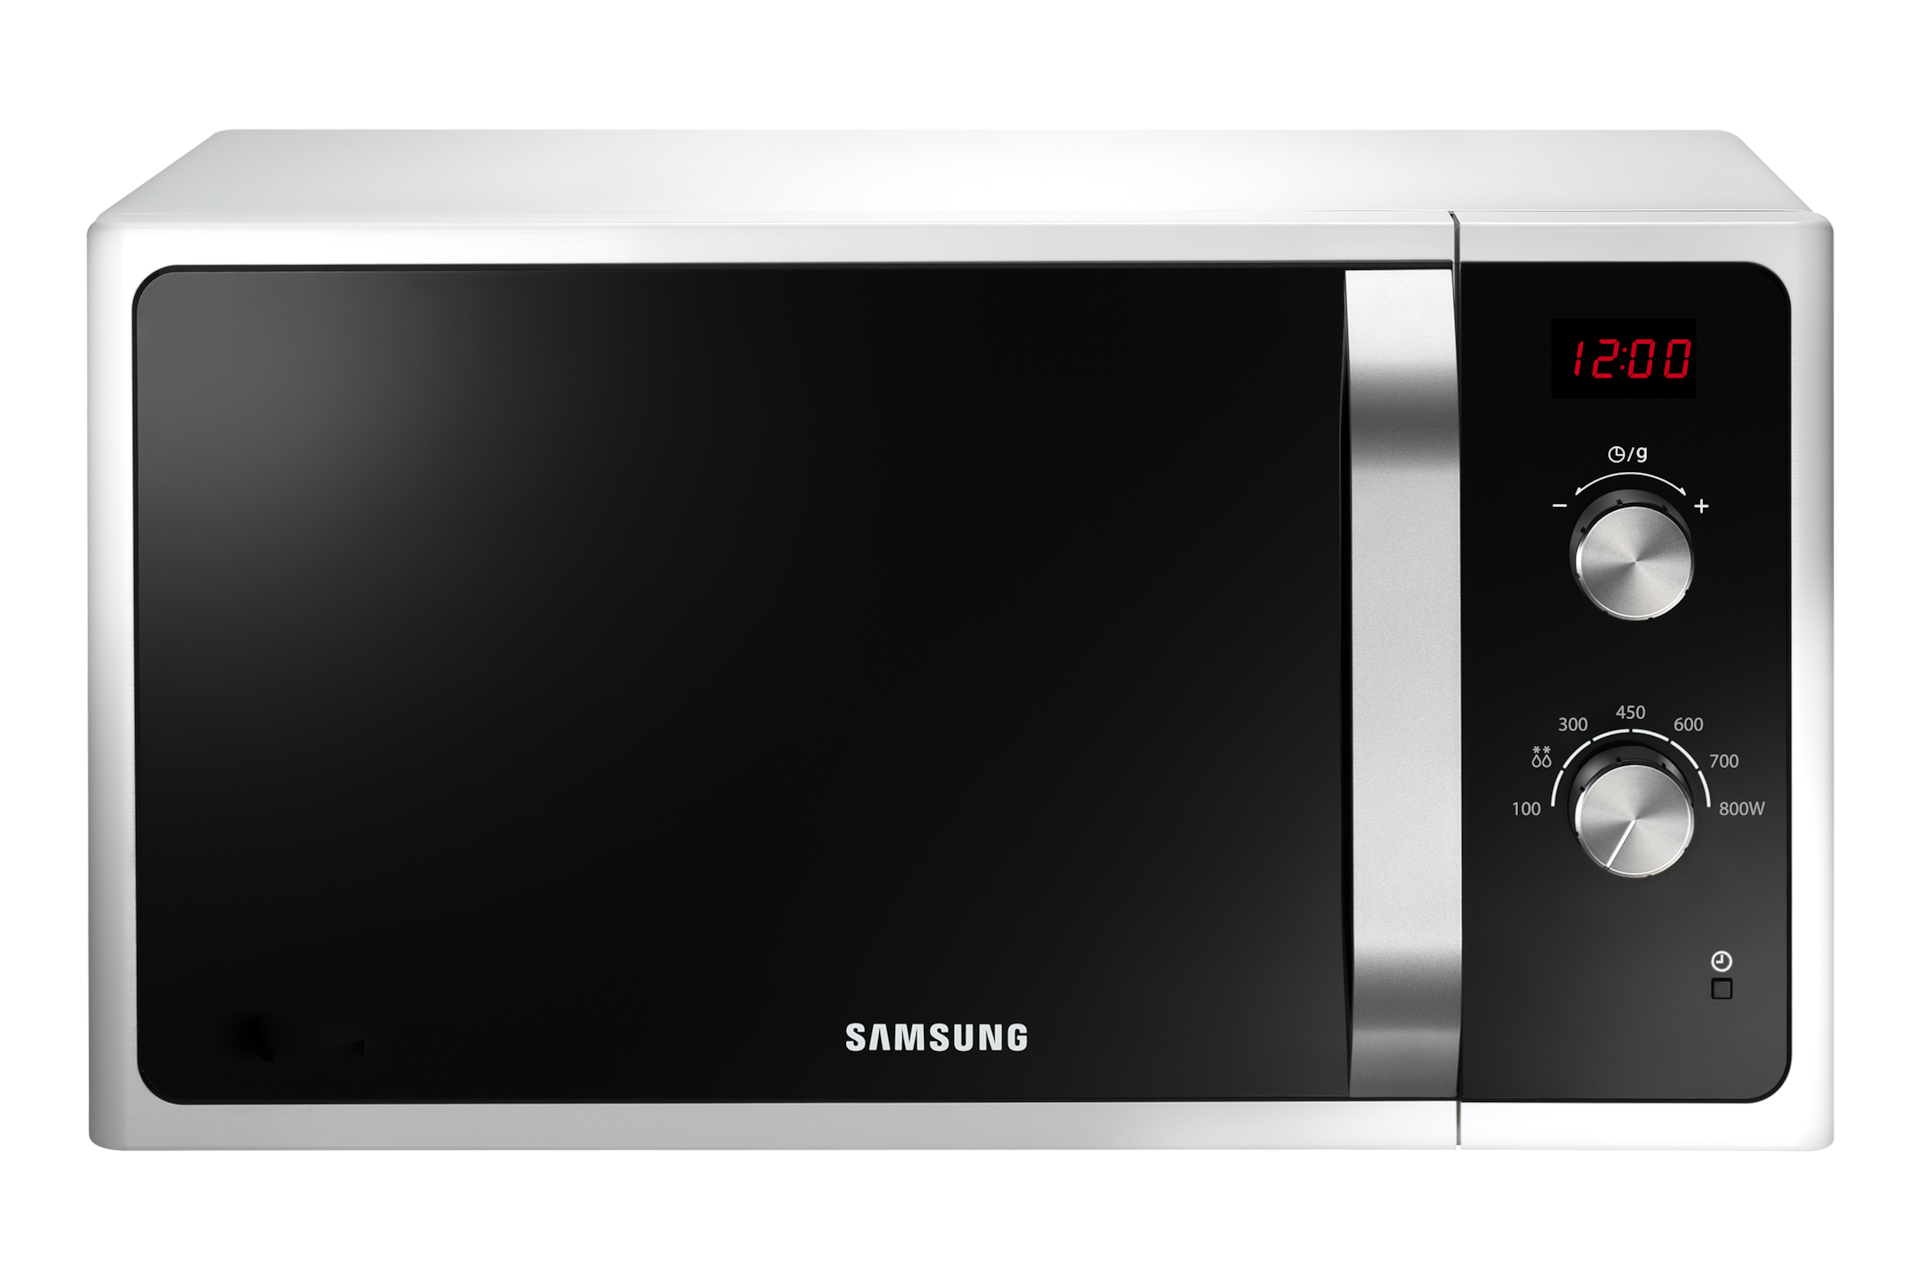 https://images.samsung.com/is/image/samsung/fr-microwave-oven-solo-ms23f300eew-ms23f300eew-ef-frontwhite-180755283?$650_519_PNG$